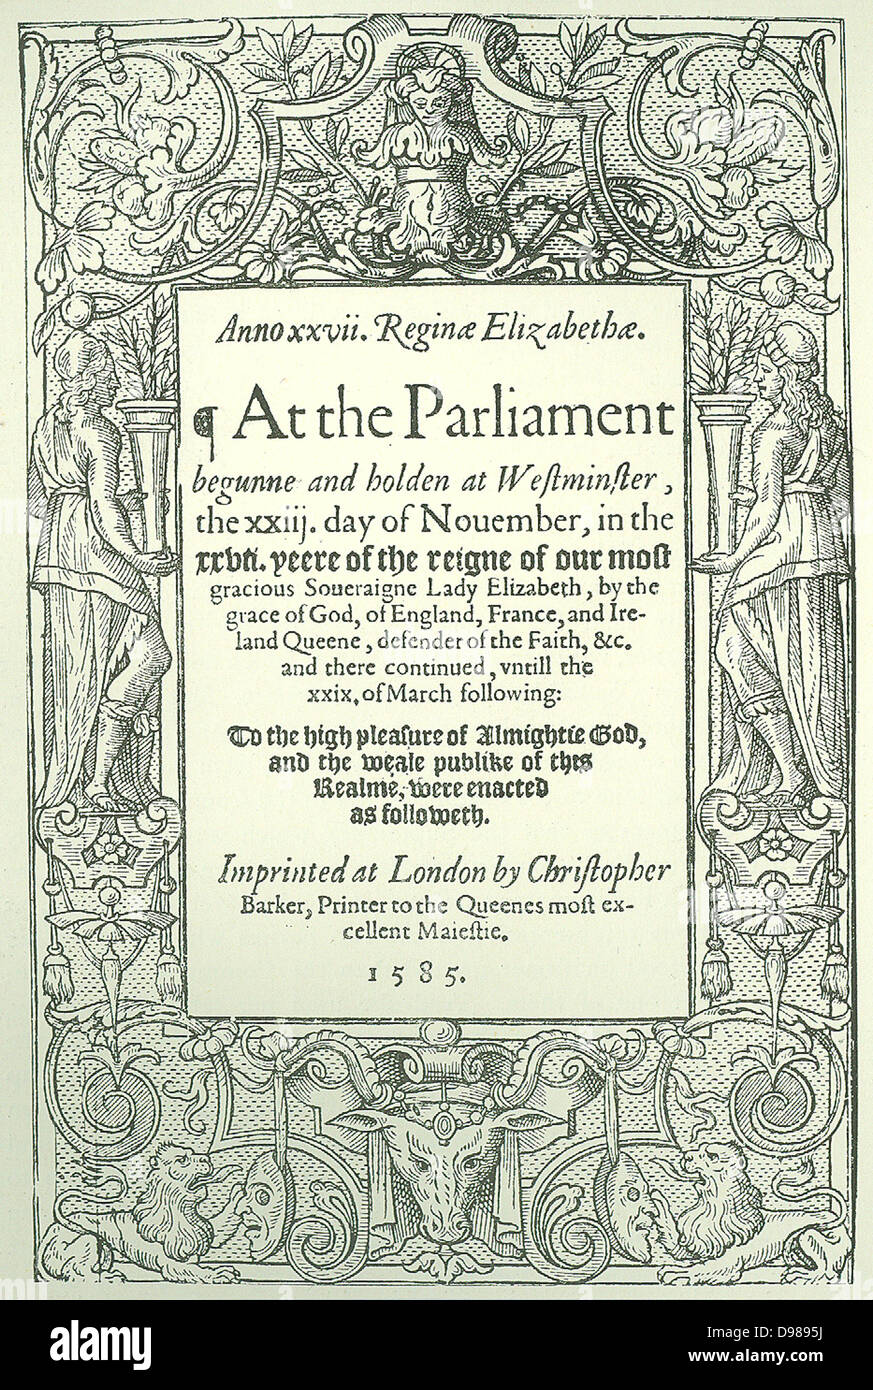 Title page of Acts of Parliament for 1585. Reign of Elizabeth I of England and Ireland. Stock Photo